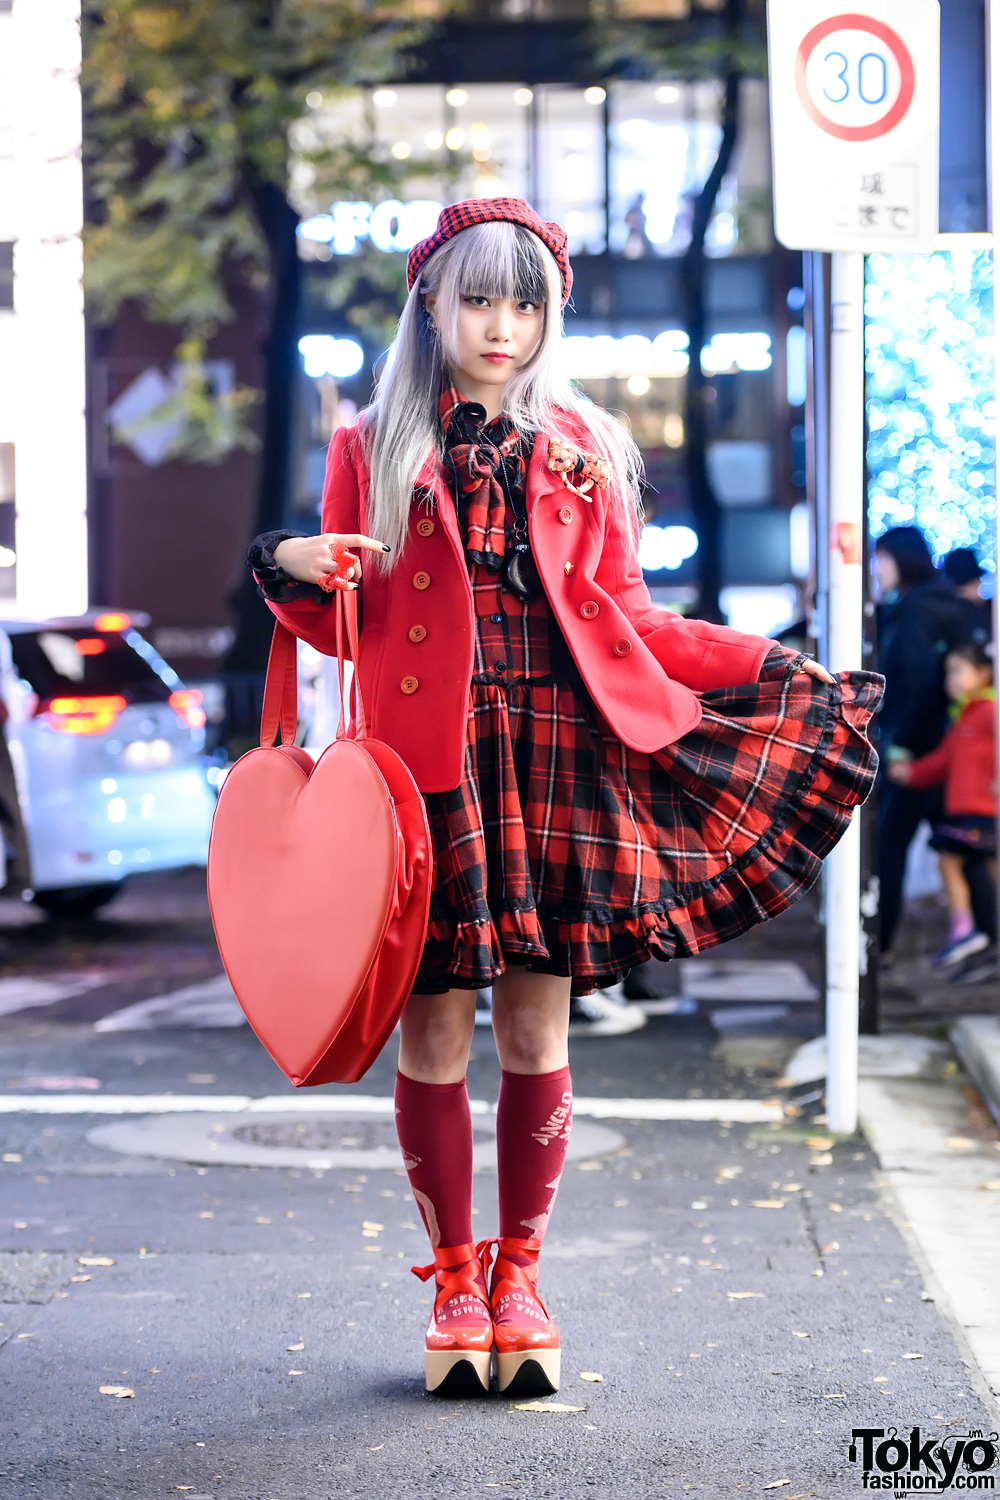 Harajuku Idol in Black & Red Street Style w/ Fangs, Plaid Dress, Rocking Horse Shoes, Giant Heart Bag & Quirky Accessories